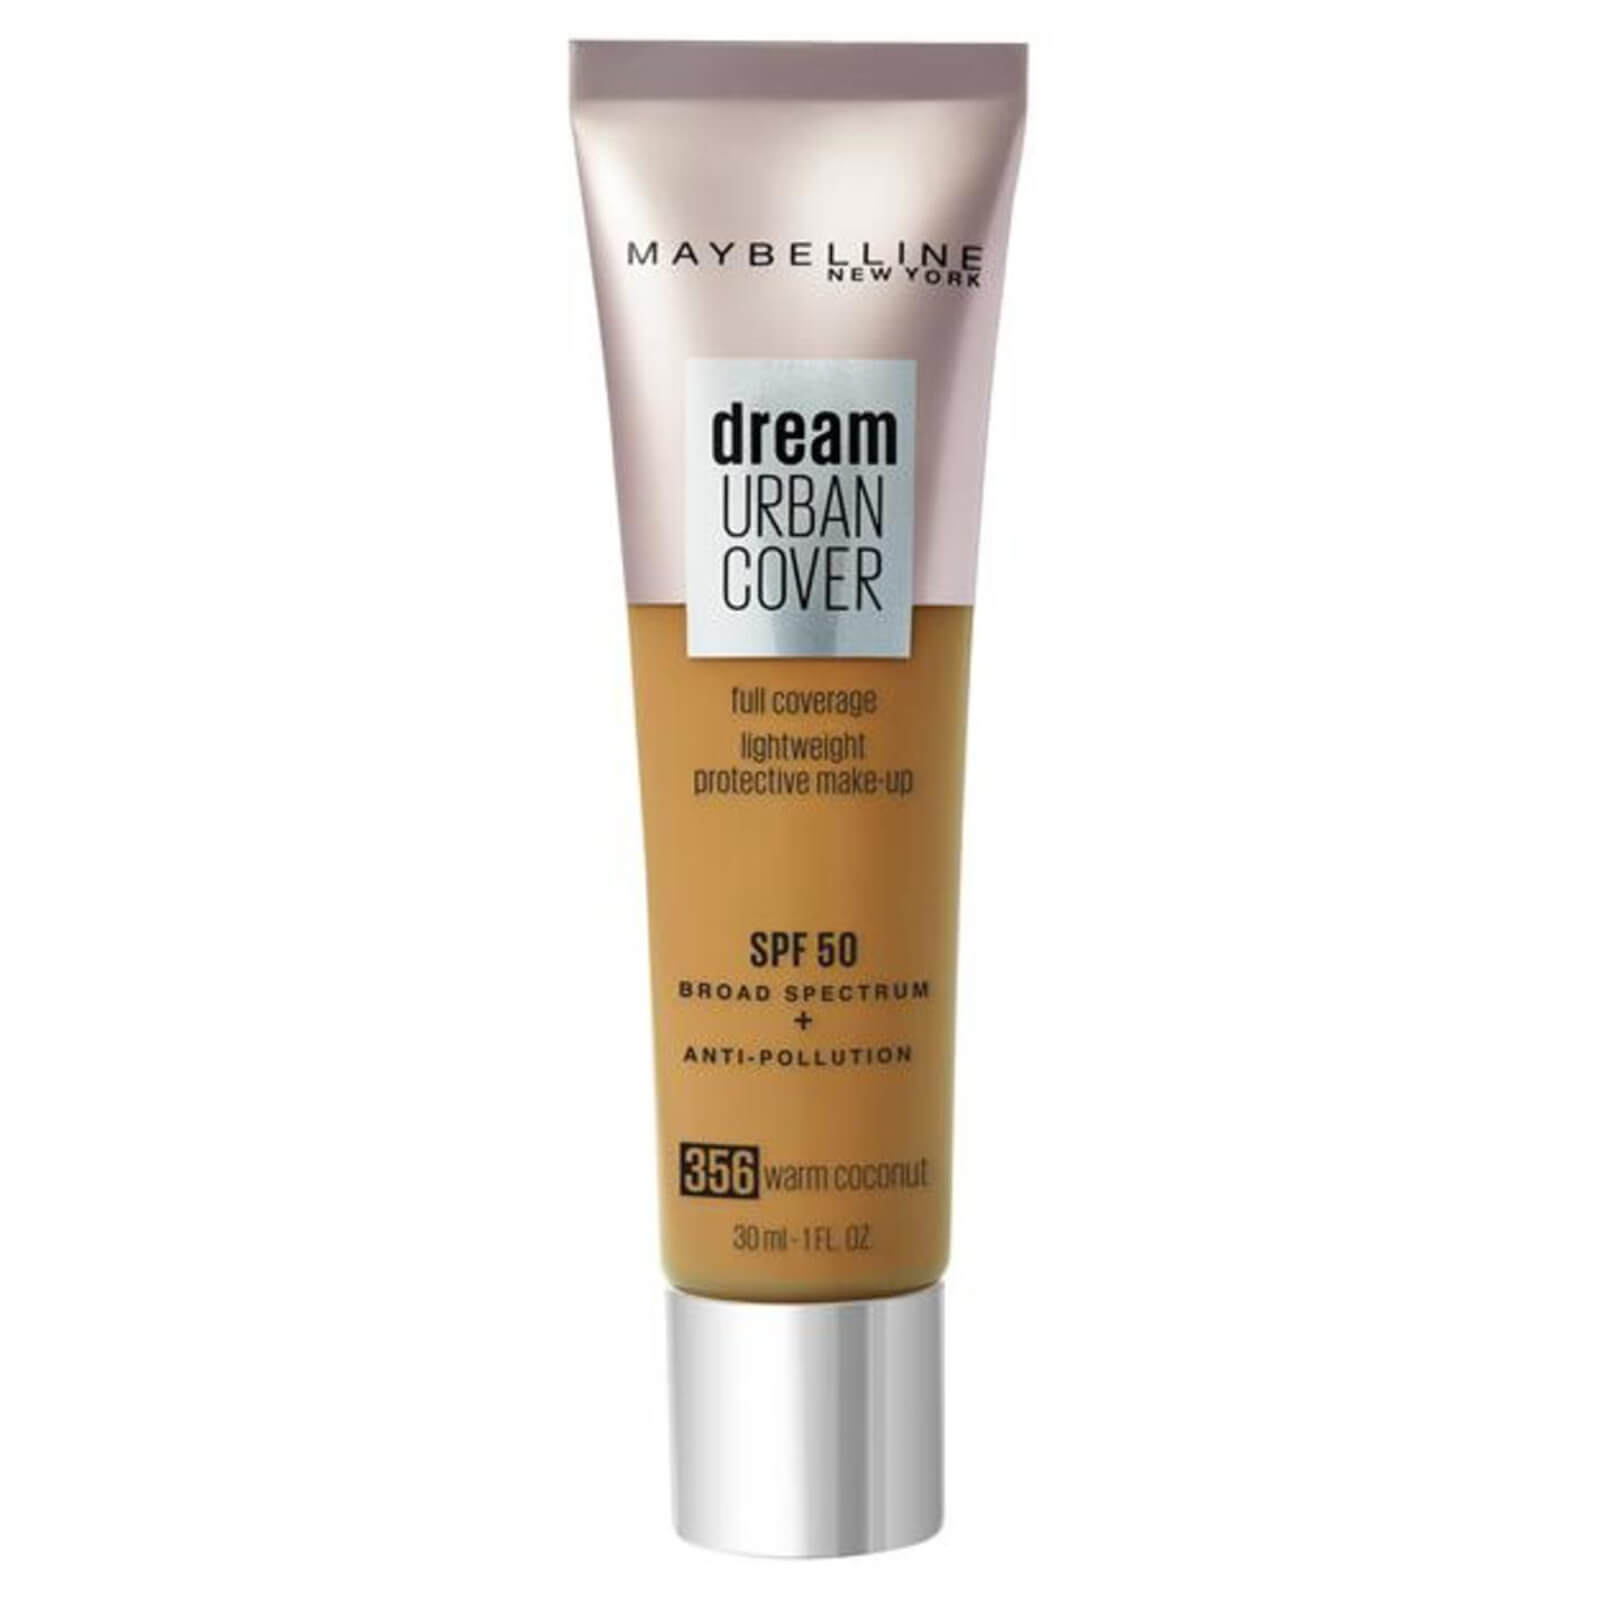 Maybelline Dream Urban Cover SPF50 Foundation 121ml (Various Shades) - 5 356 Warm Coconut